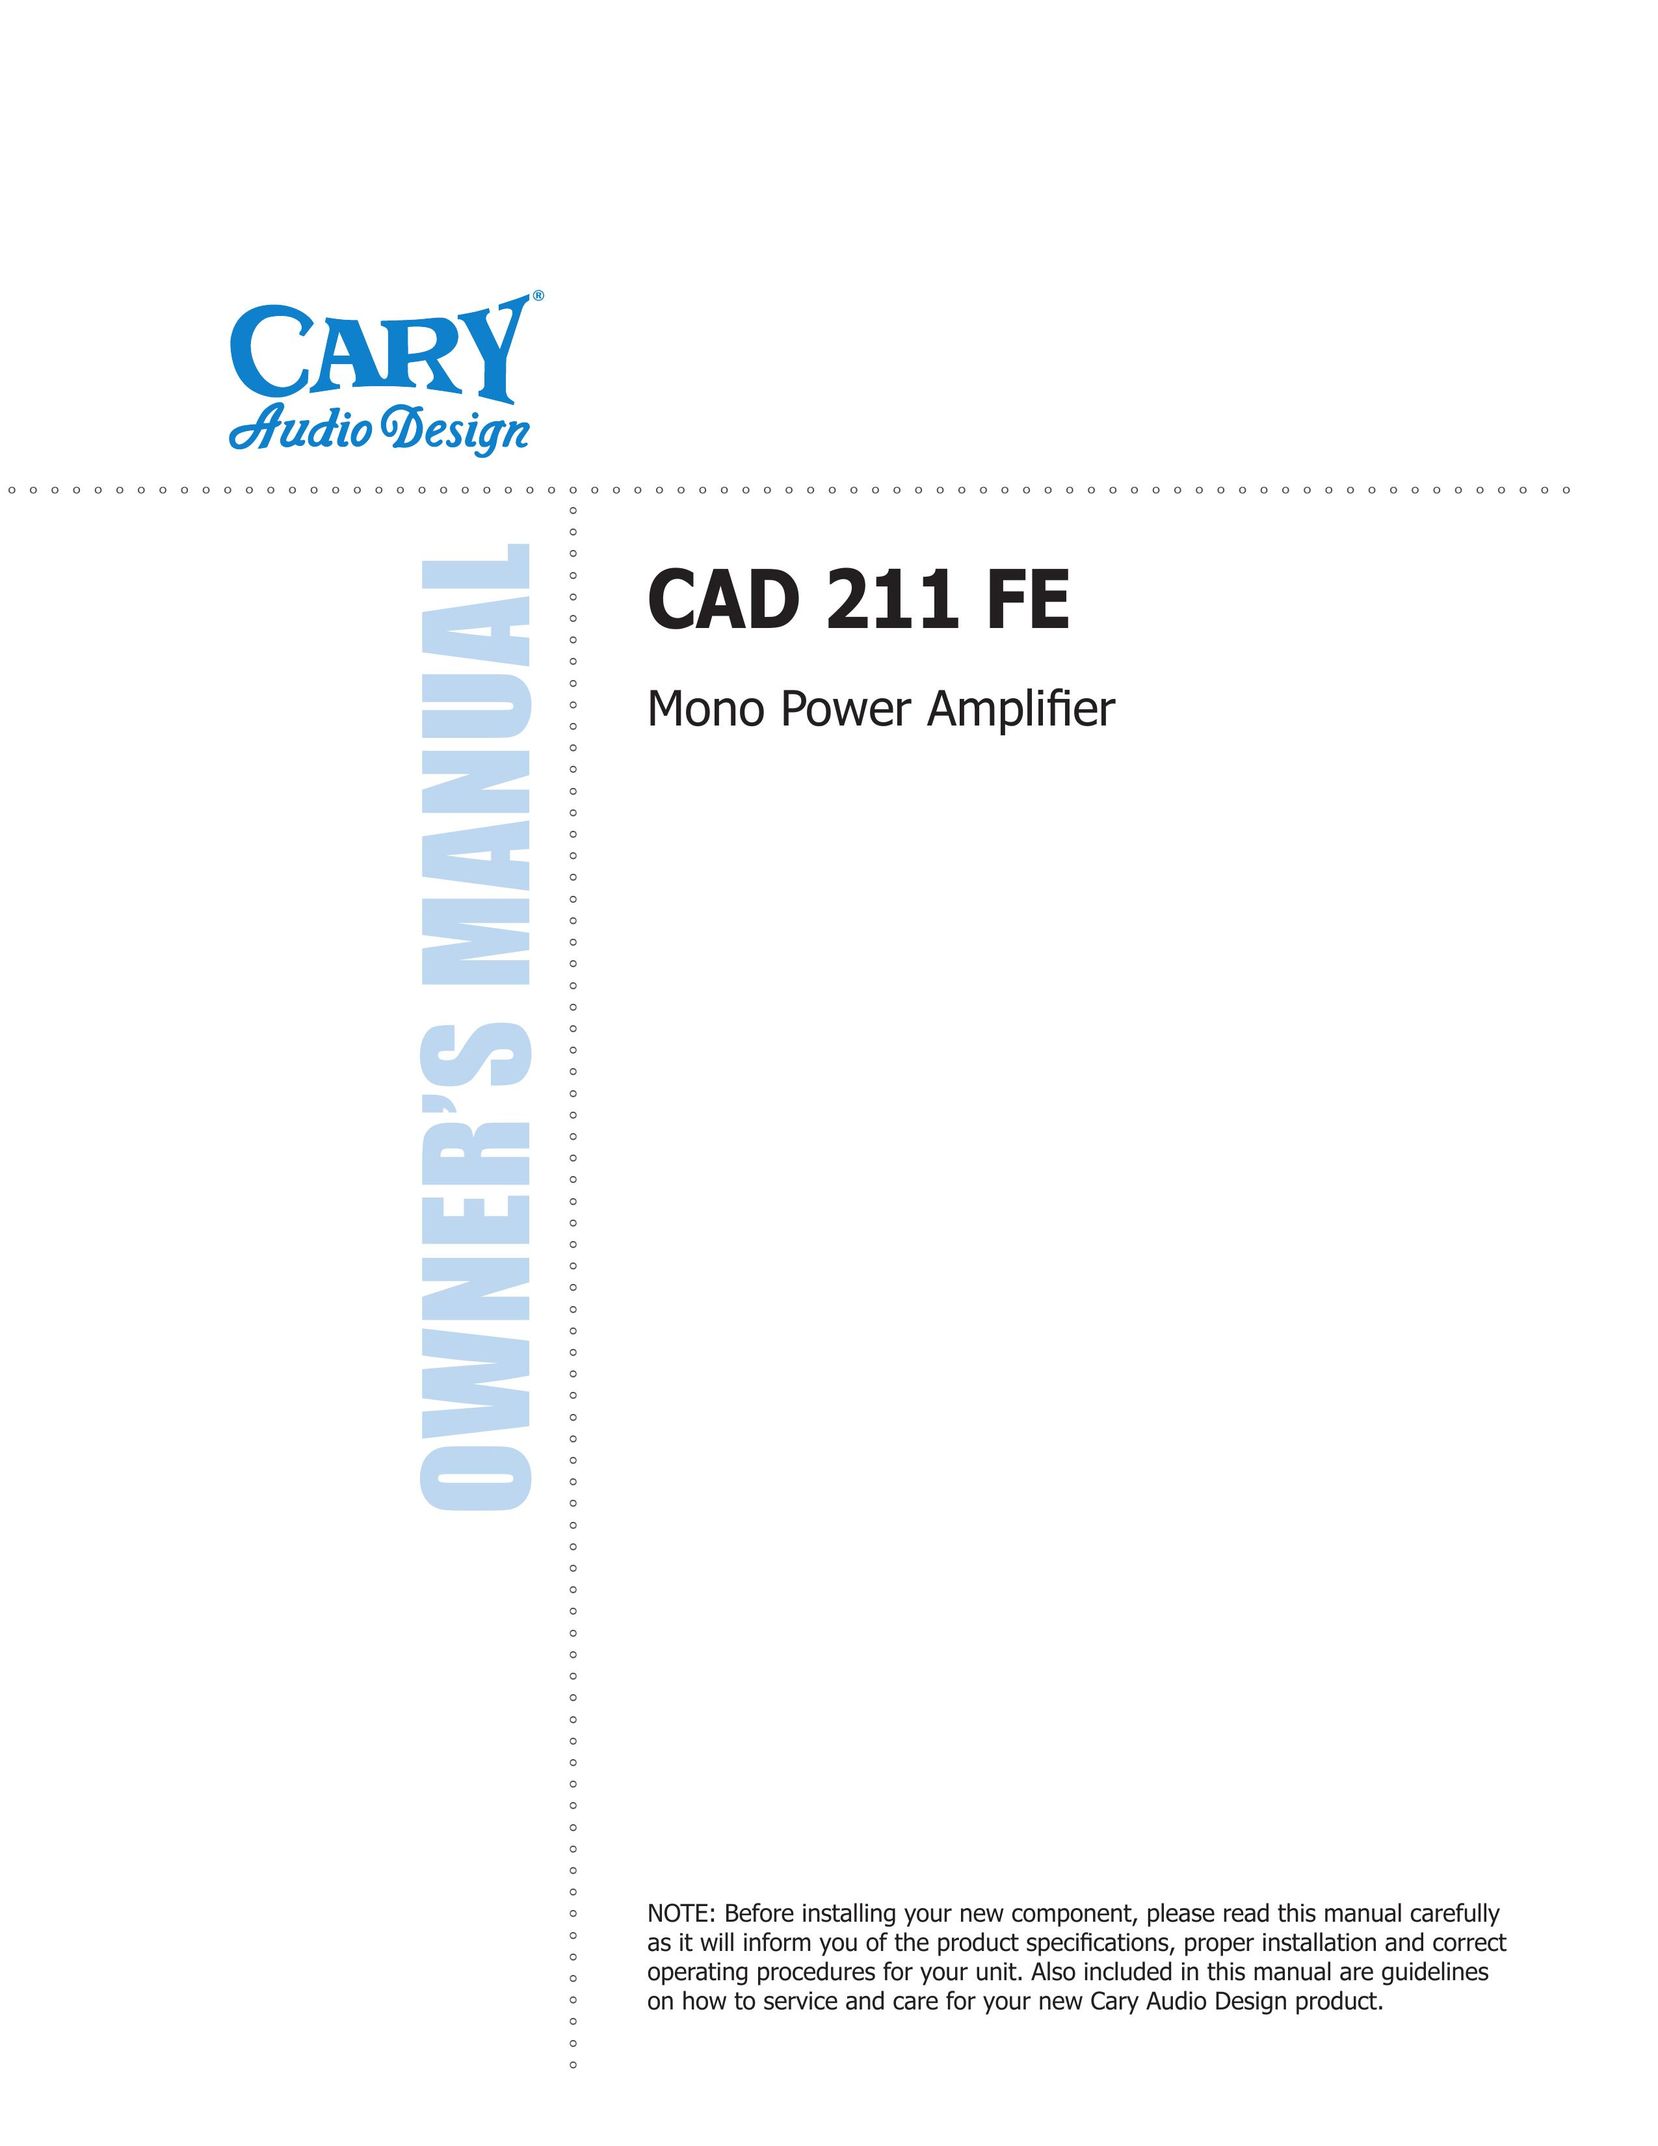 Cary Audio Design CAD 211 FE Stereo Amplifier User Manual